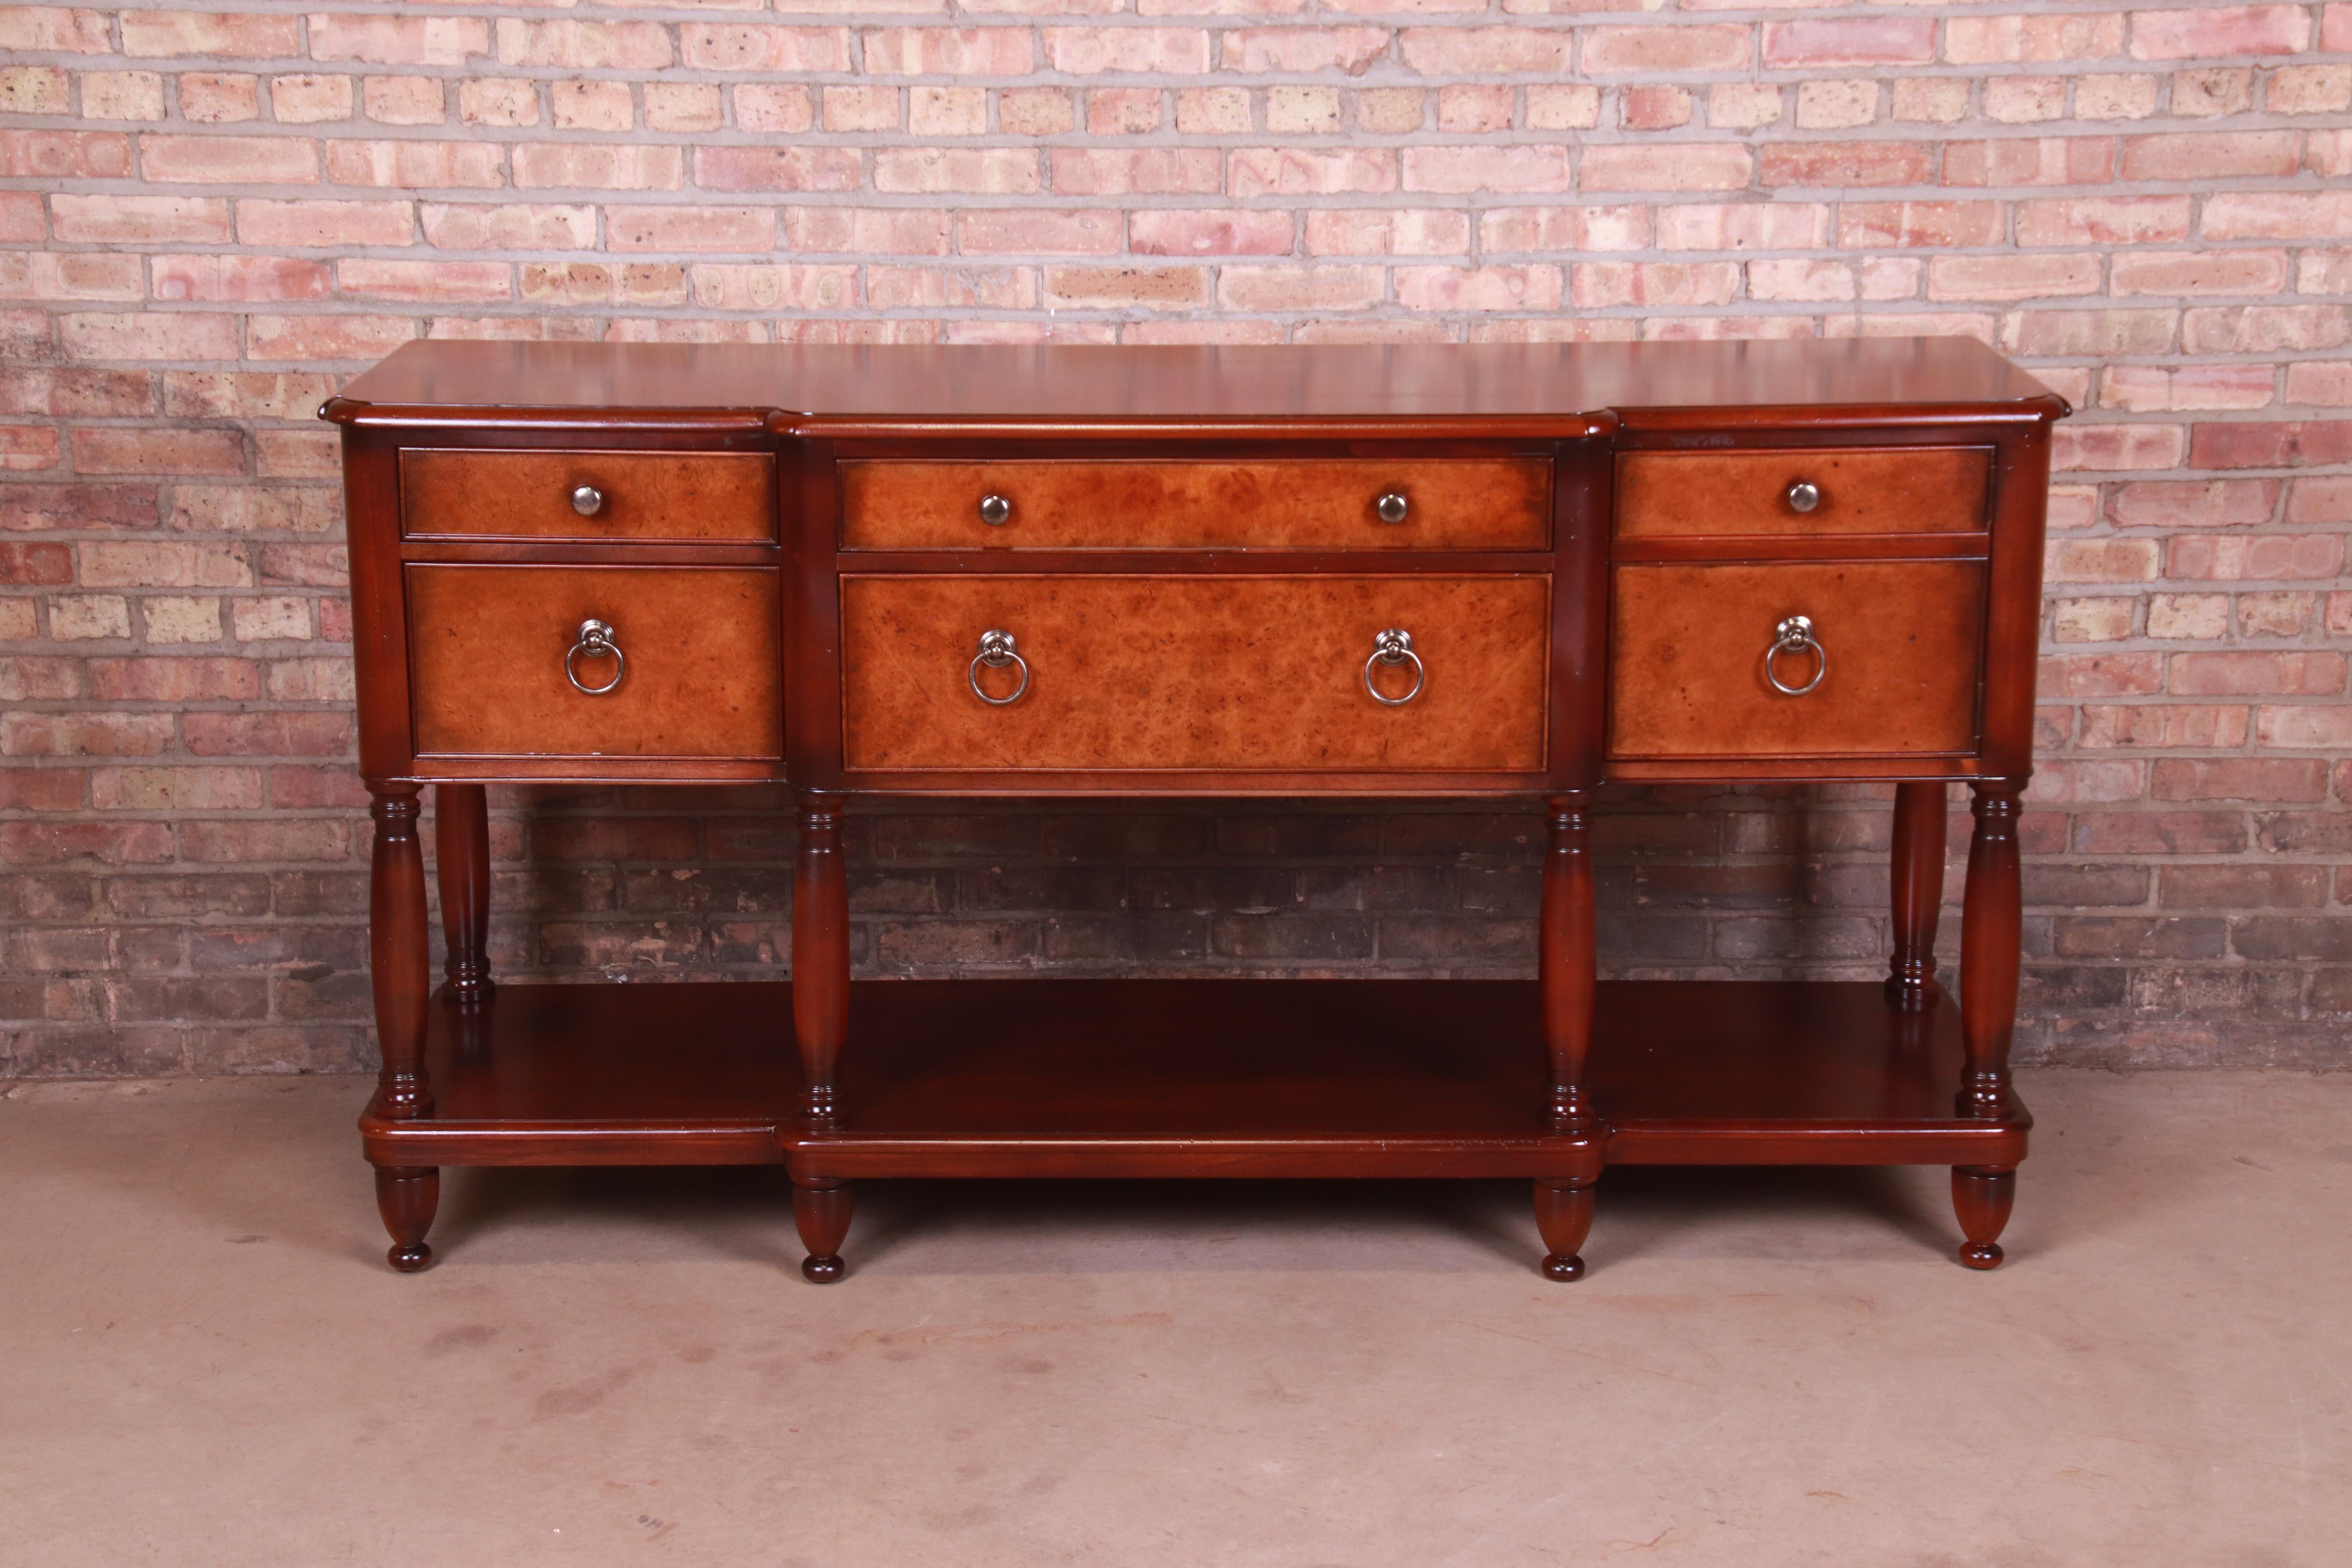 An exceptional Italian Provincial style sideboard, credenza, or bar cabinet

By Baker Furniture, 